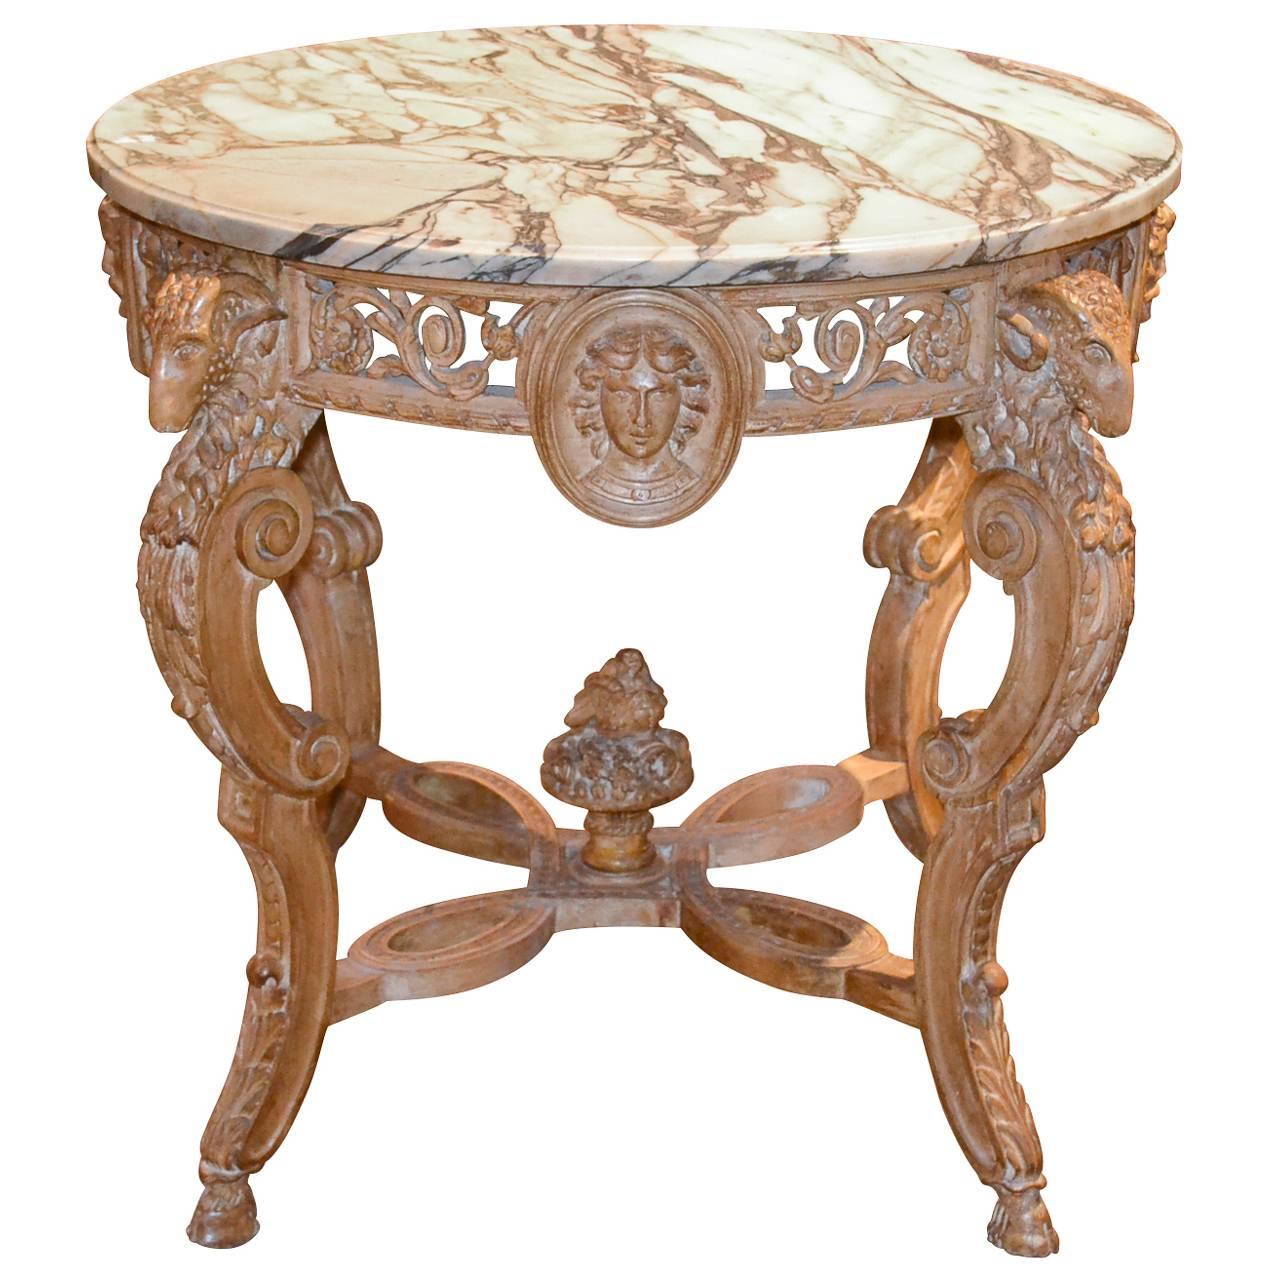 19th Century English Carved Center Table